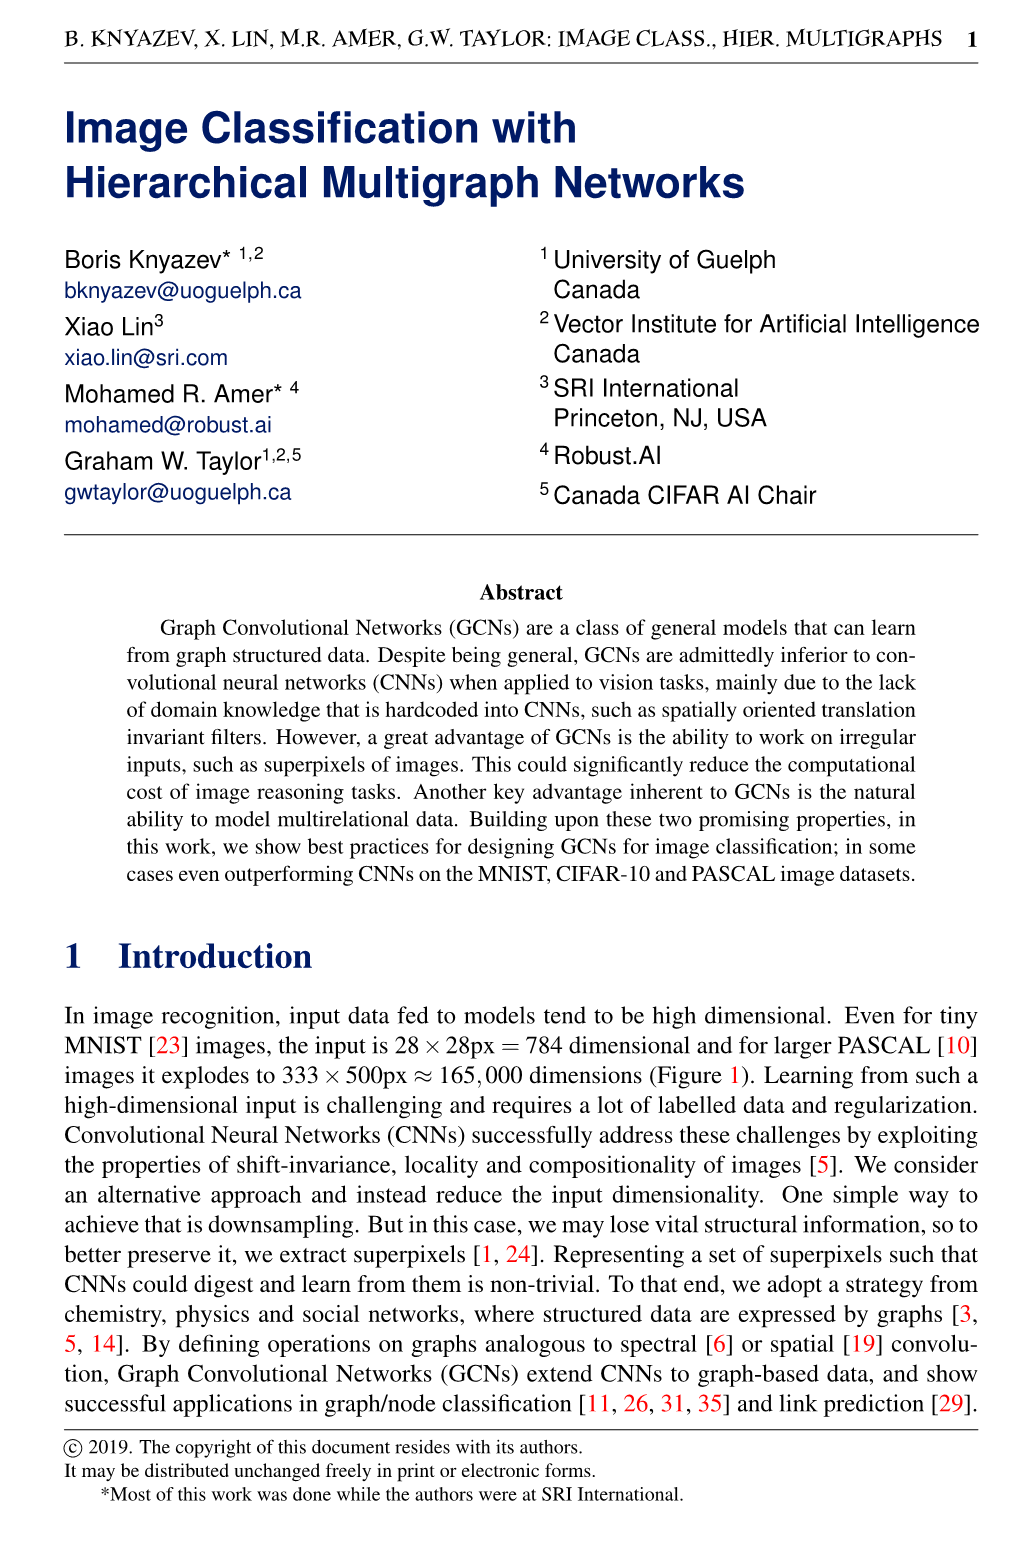 Image Classification with Hierarchical Multigraph Networks